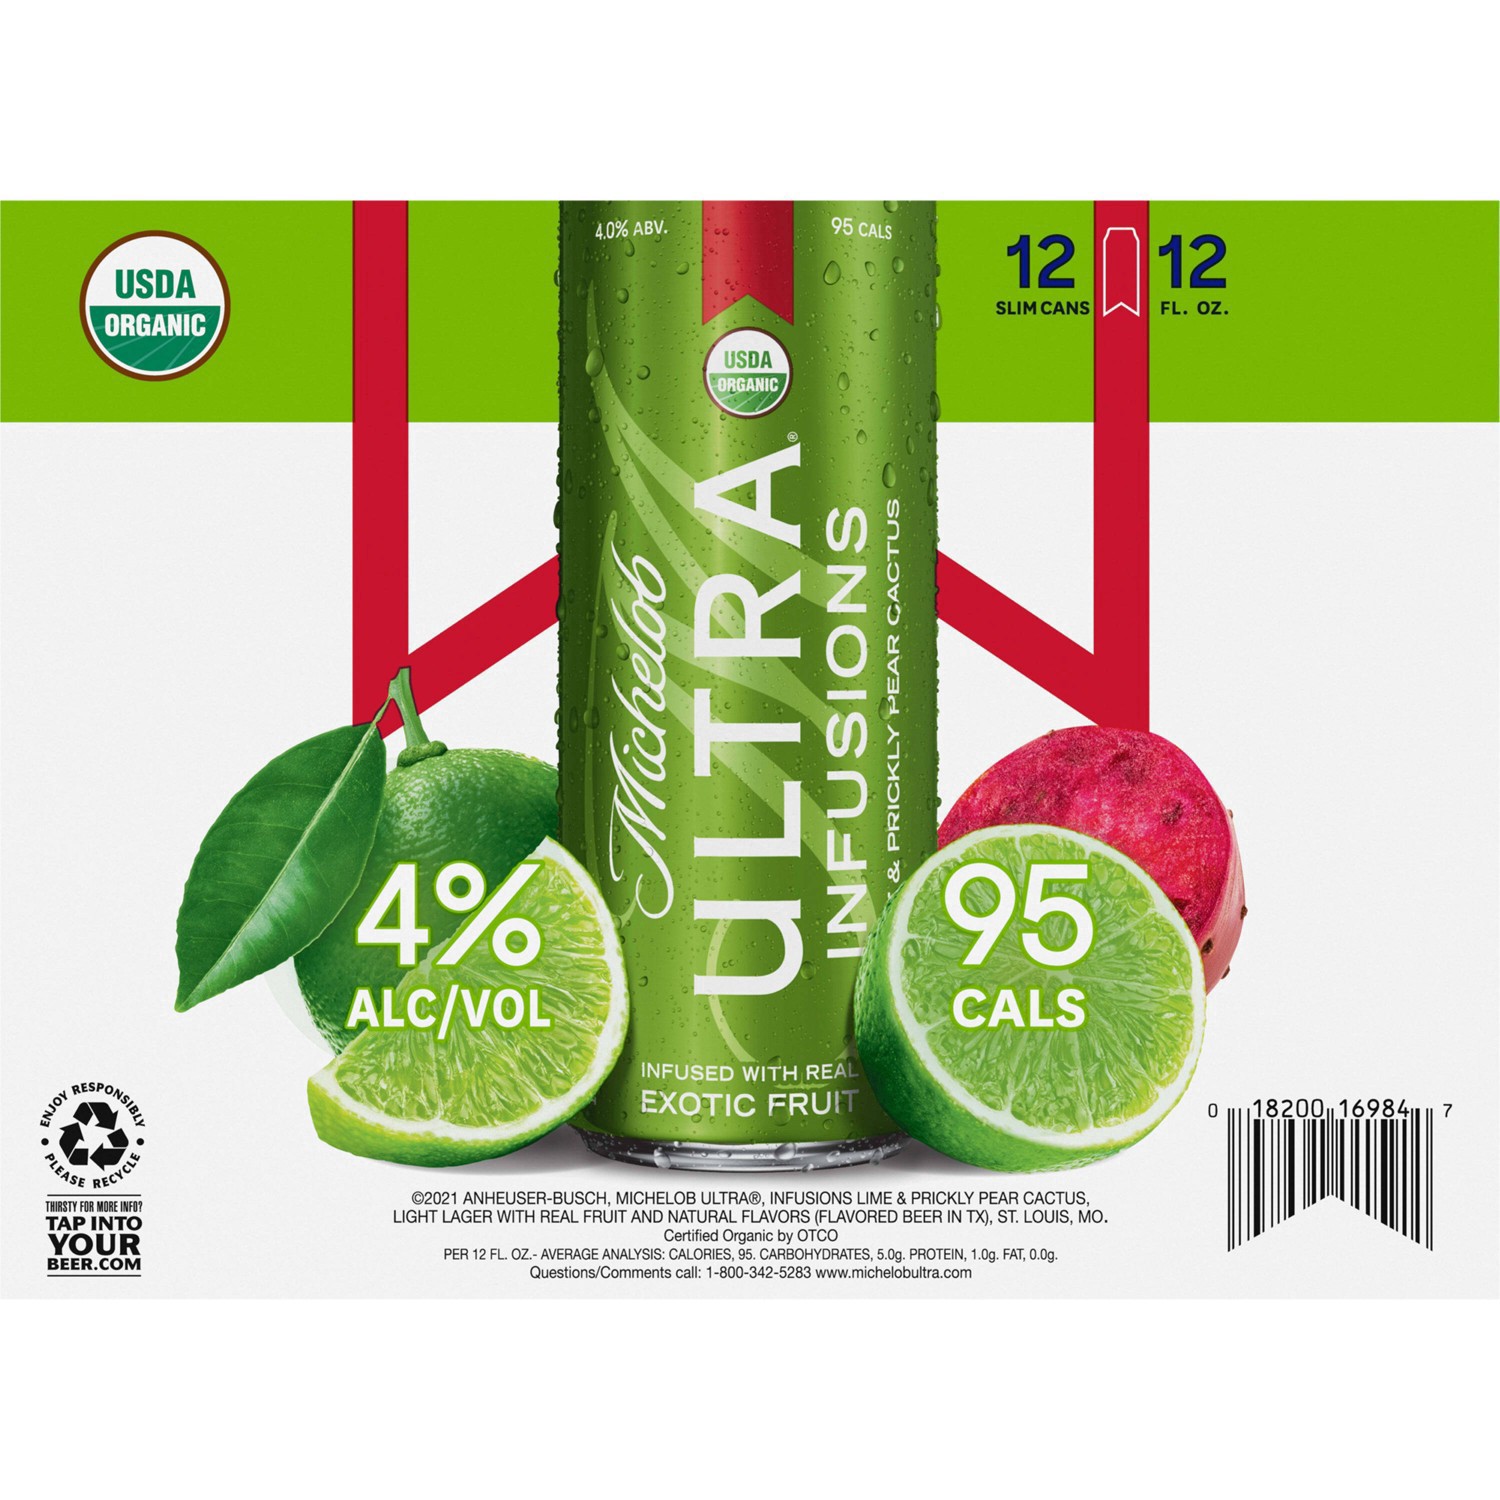 slide 71 of 99, Michelob Ultra Infusions Lime & Prickly Pear Cactus Light Beer, 4% ABV, 12 ct; 12 fl oz